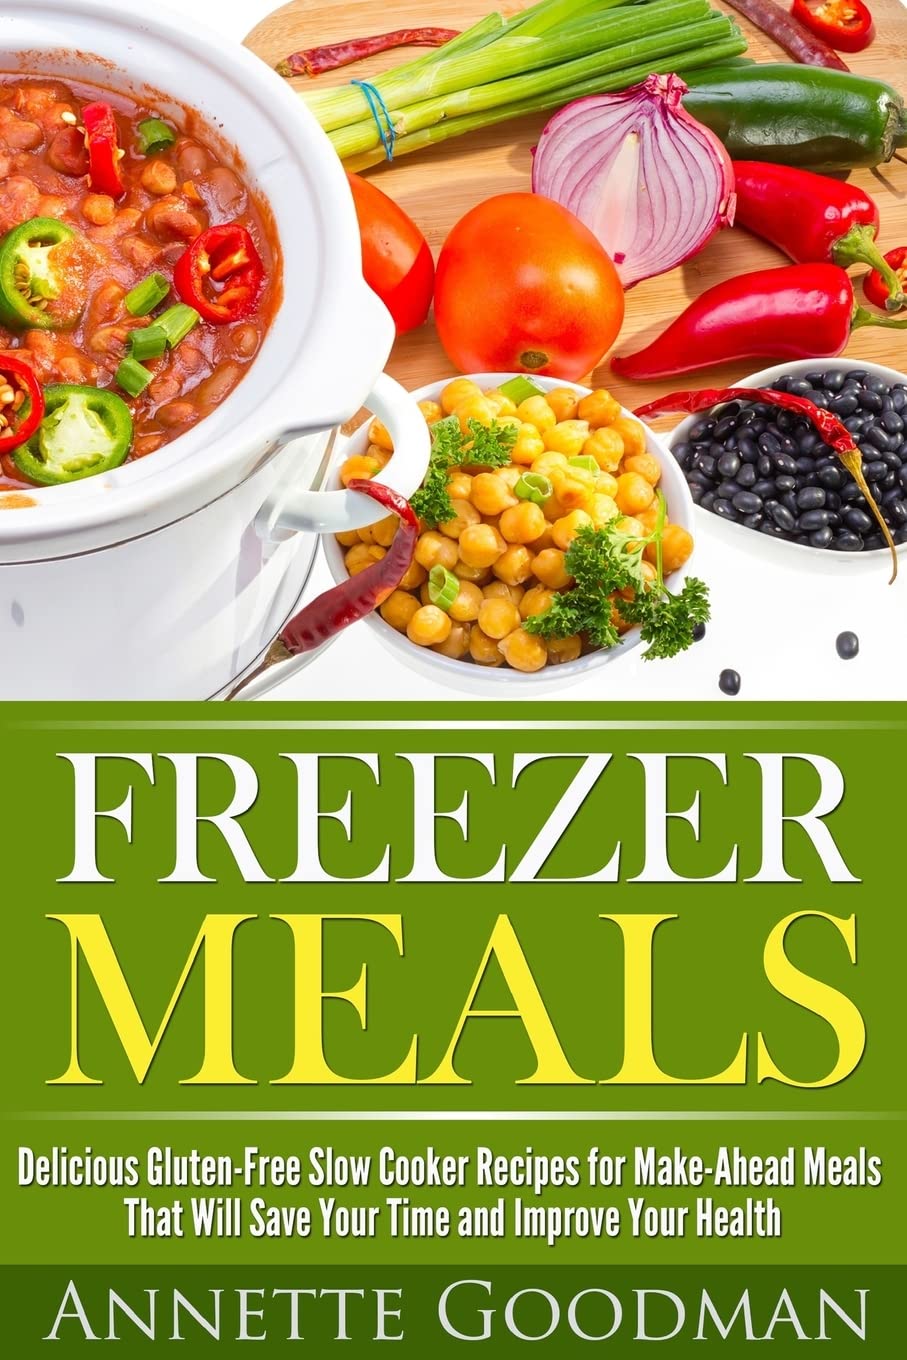 Freezer Meals: Delicious Gluten-Free Slow Cooker Recipes for Make-Ahead Meals That Will Save Your Time and Improve Your Health (Weight Loss Plan Series)